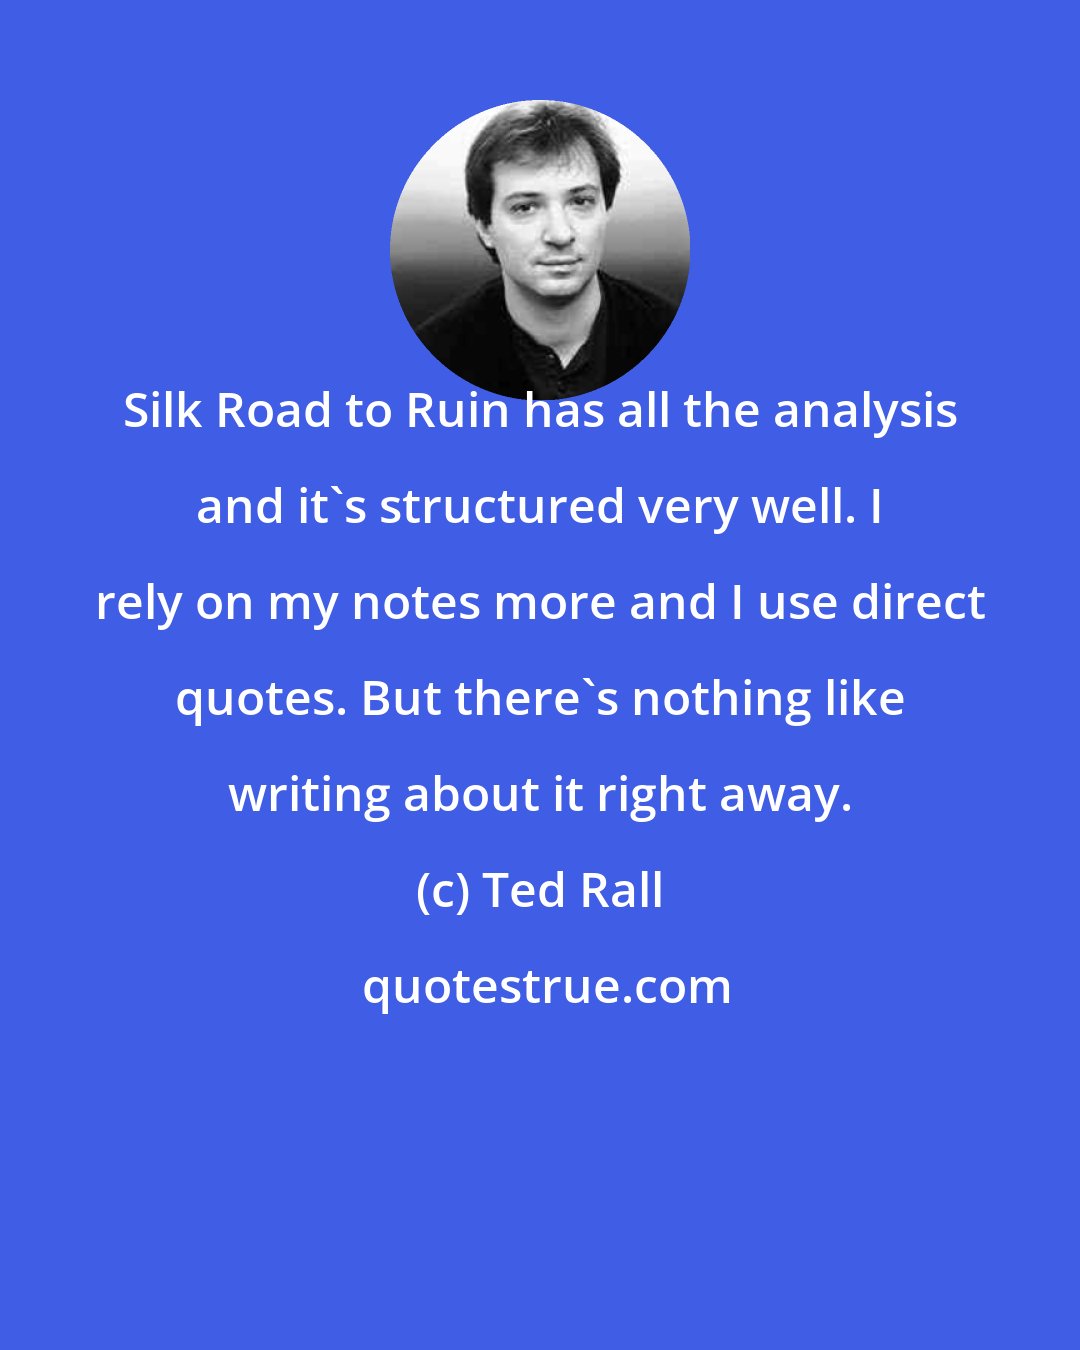 Ted Rall: Silk Road to Ruin has all the analysis and it's structured very well. I rely on my notes more and I use direct quotes. But there's nothing like writing about it right away.